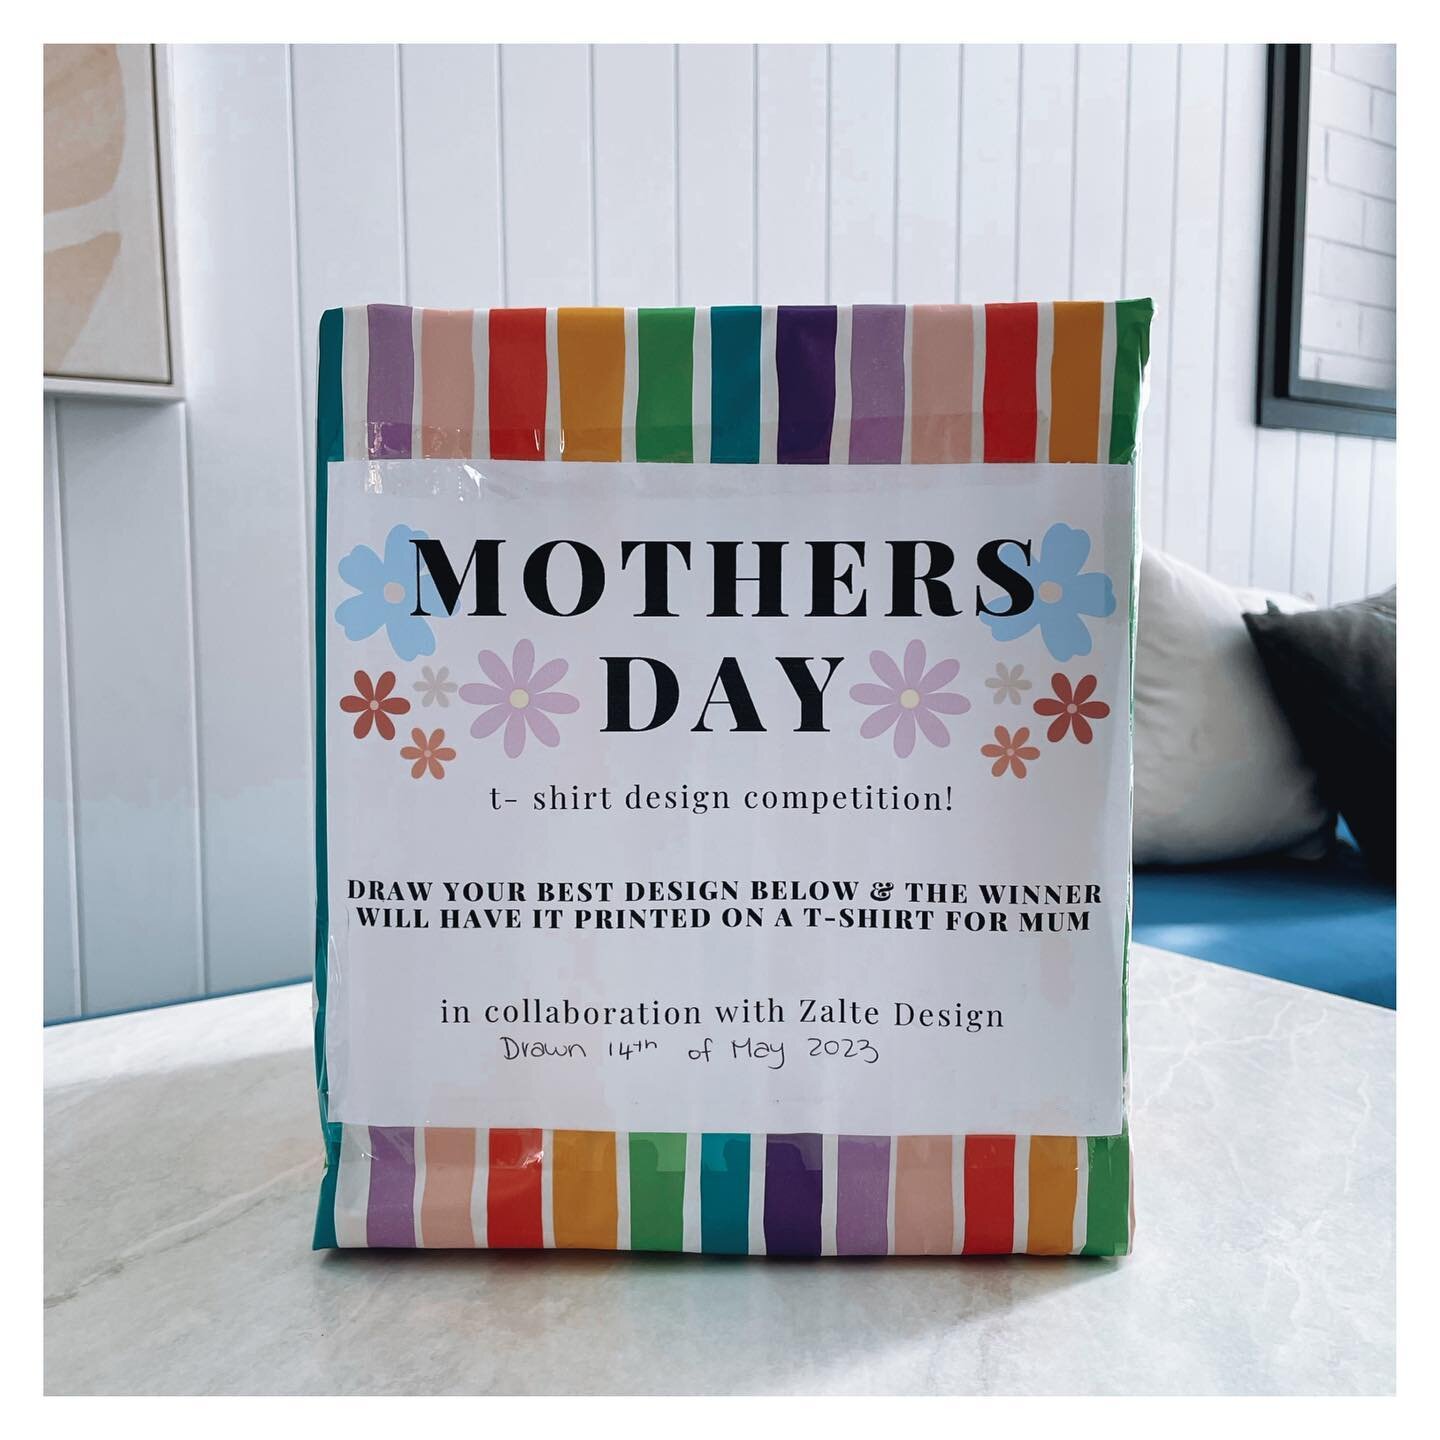 Don&rsquo;t forget about our Mother&rsquo;s Day competition! 🥳 

Thanks to @zaltedesign , draw your BEST design, pop it in our competition box with your name &amp; phone number &amp; the winner will have their design printed on a t-shirt 🙌🏼

the w